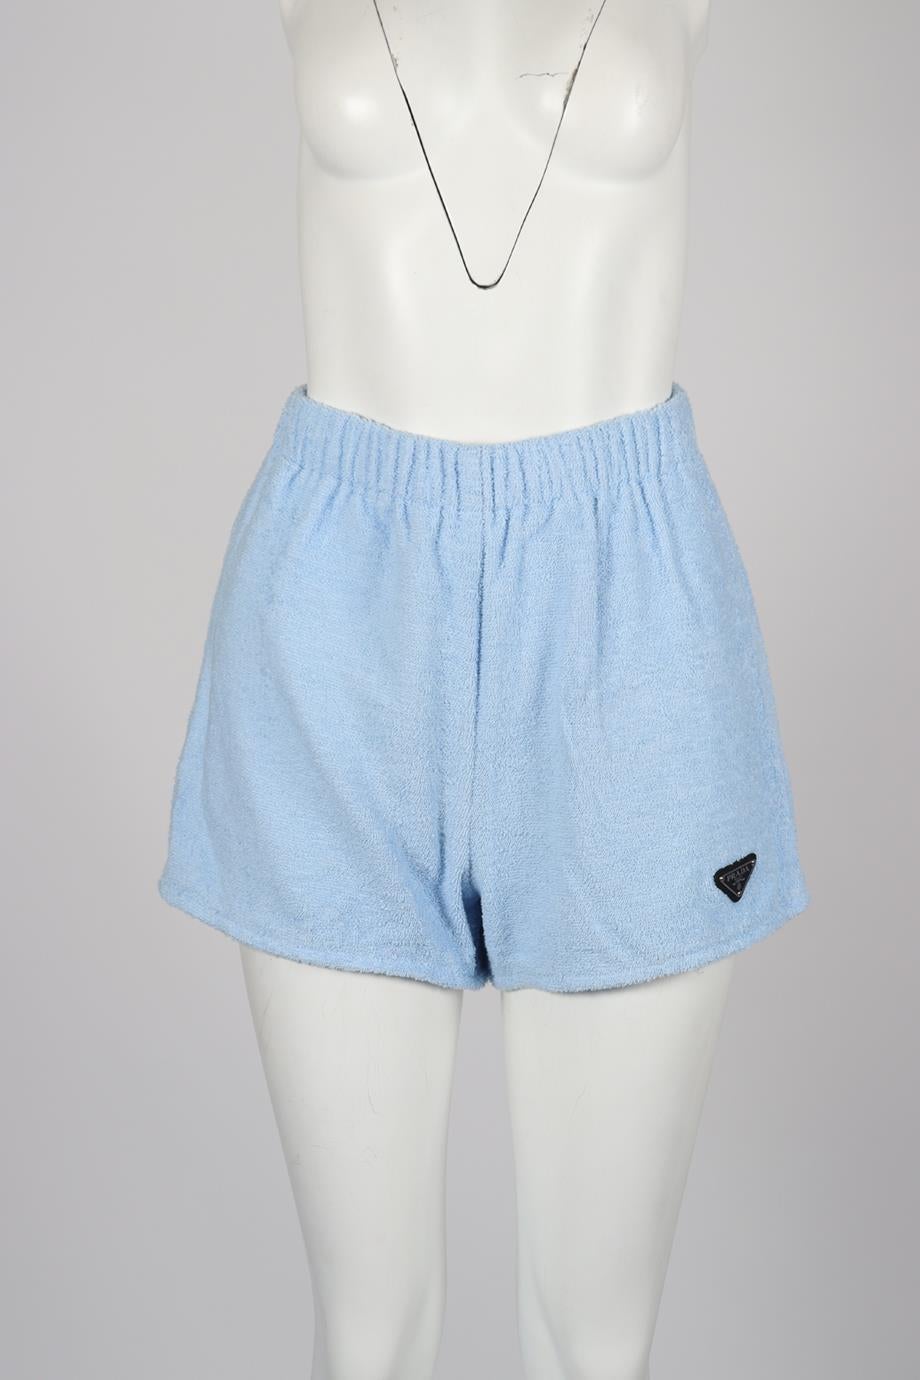 Prada Logo Detailed Terry Cloth Shorts. Blue. Pull on. 100% Cotton; fabric2: 100% reycled polyamide. IT 38 (UK 6, US 2, FR 34). Waist: 25 in. Hips: 34 in. Length: 14 in. Inseam: 2.6 in. Rise: 13.4 in. Condition: Used. Very good condition - No sign